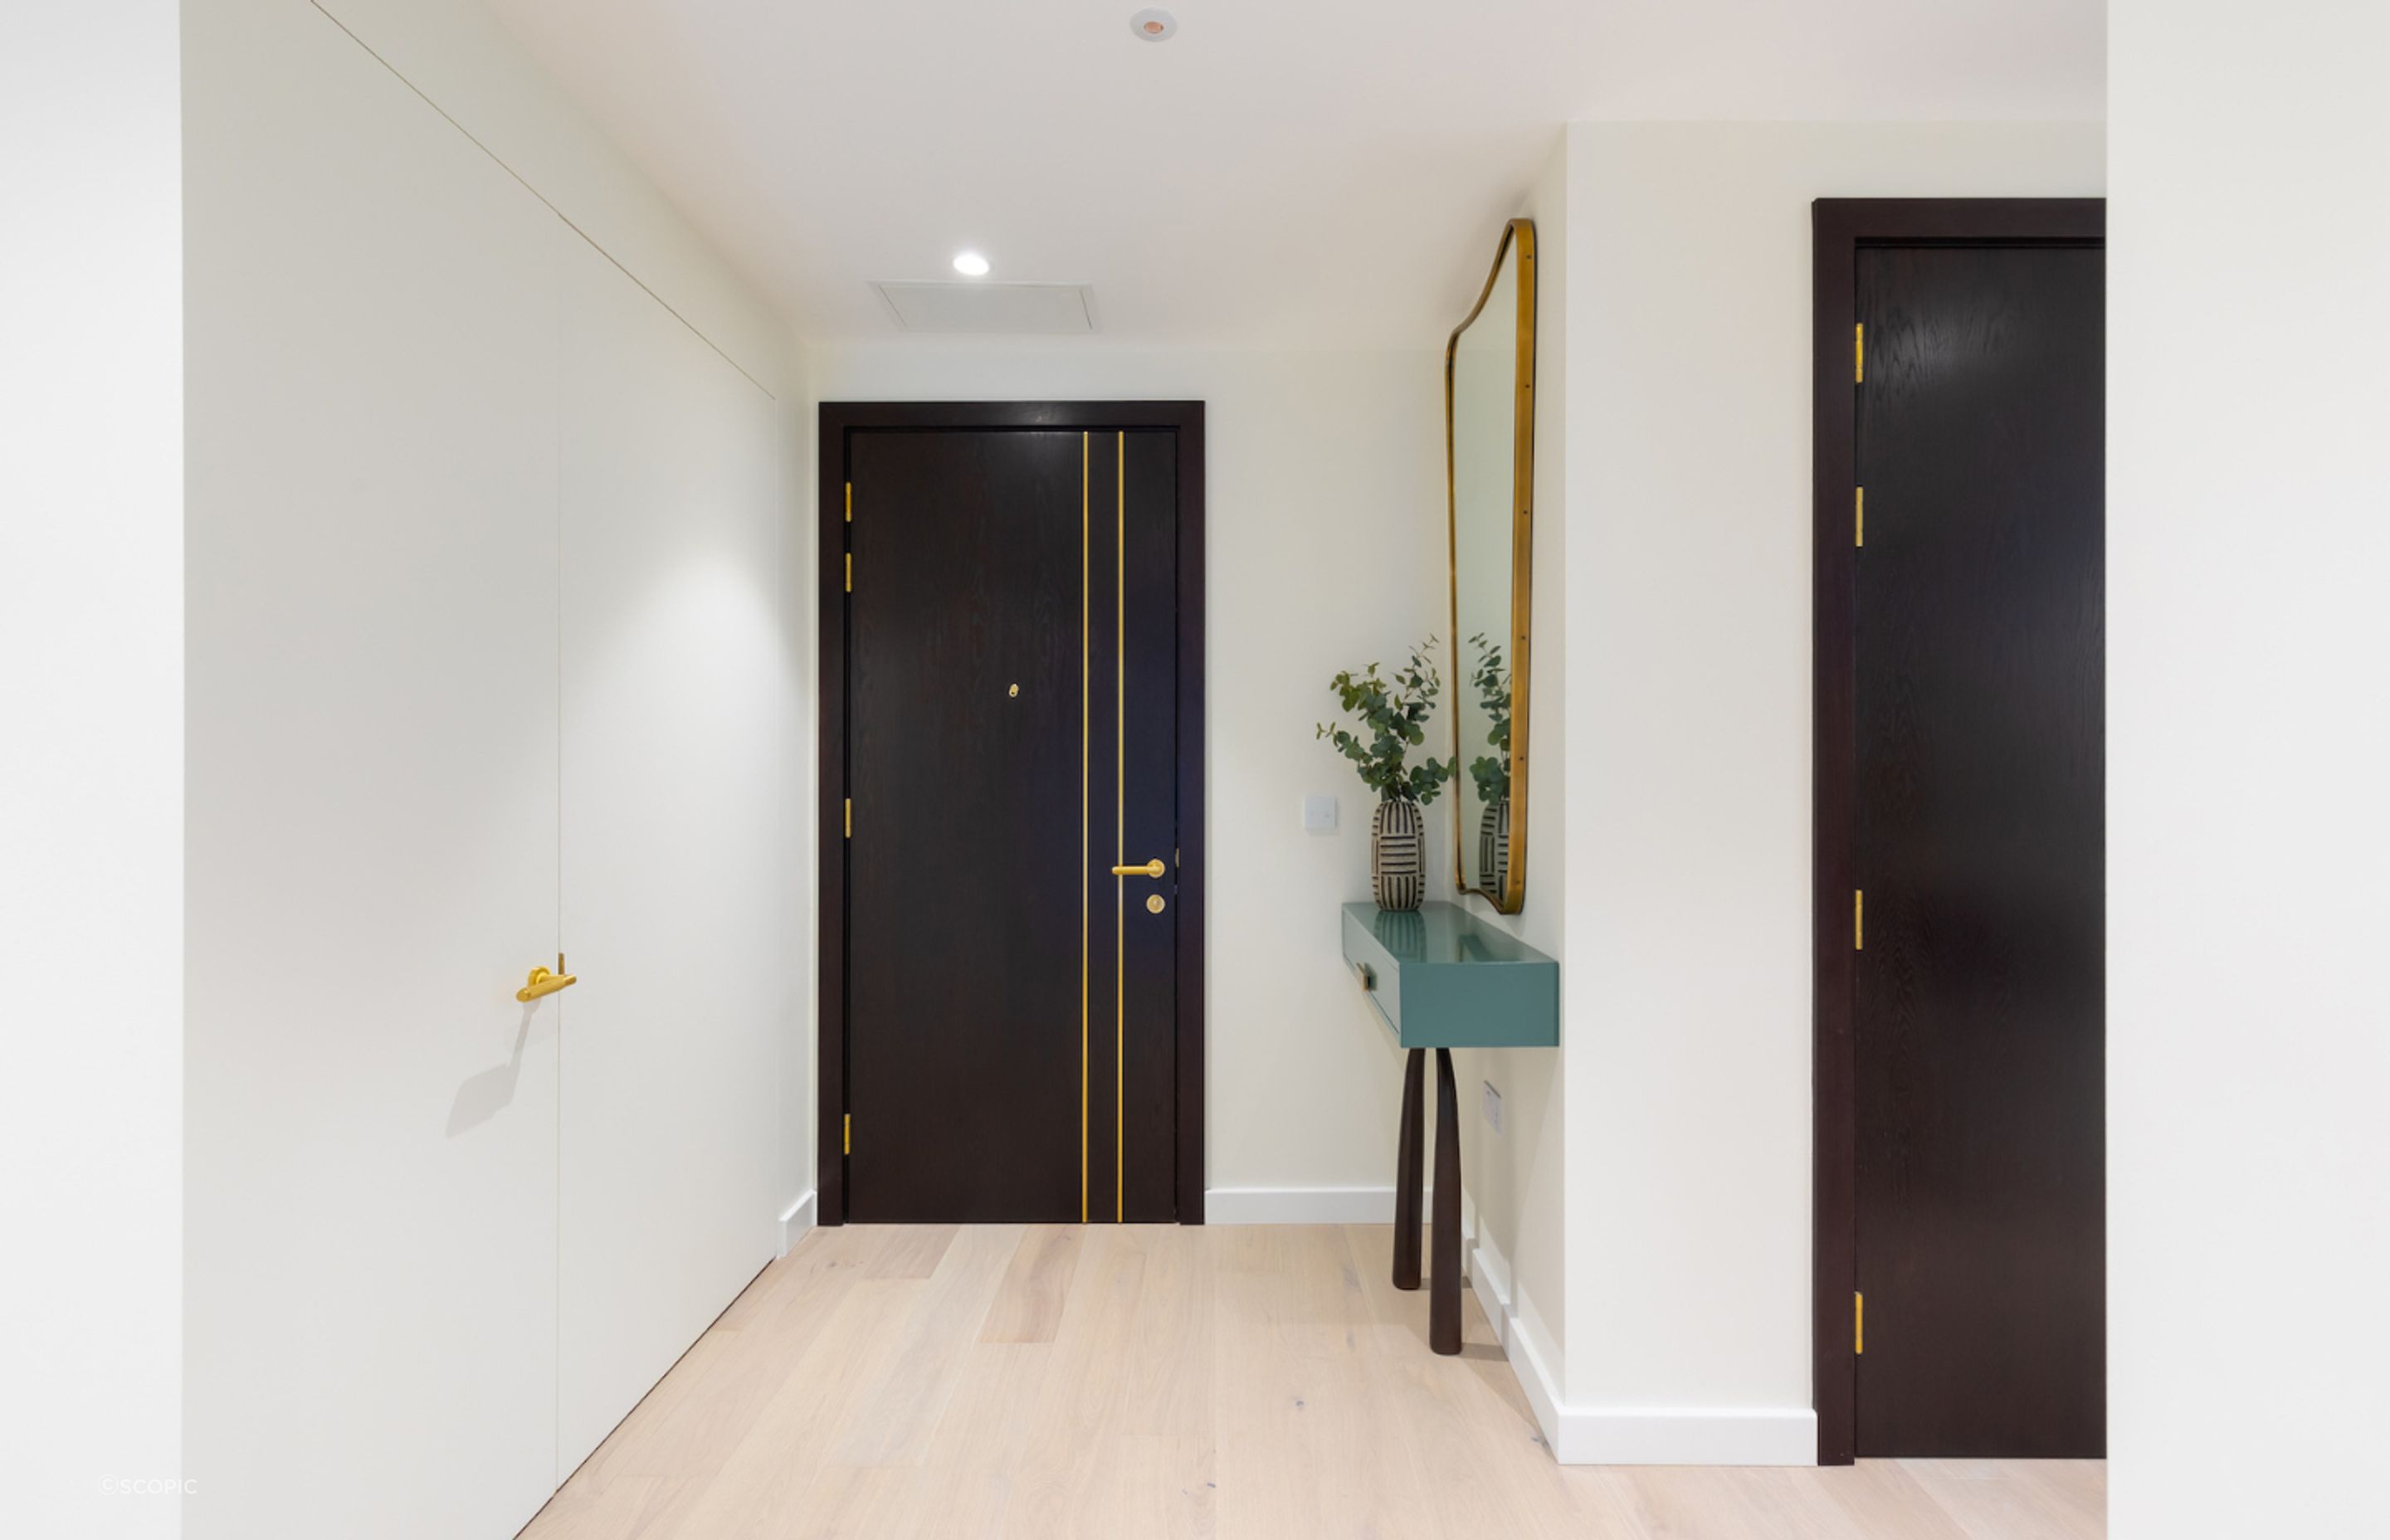 The white wall on the left keeps the entry space uncluttered with an EzyJamb SRC framed double-door.